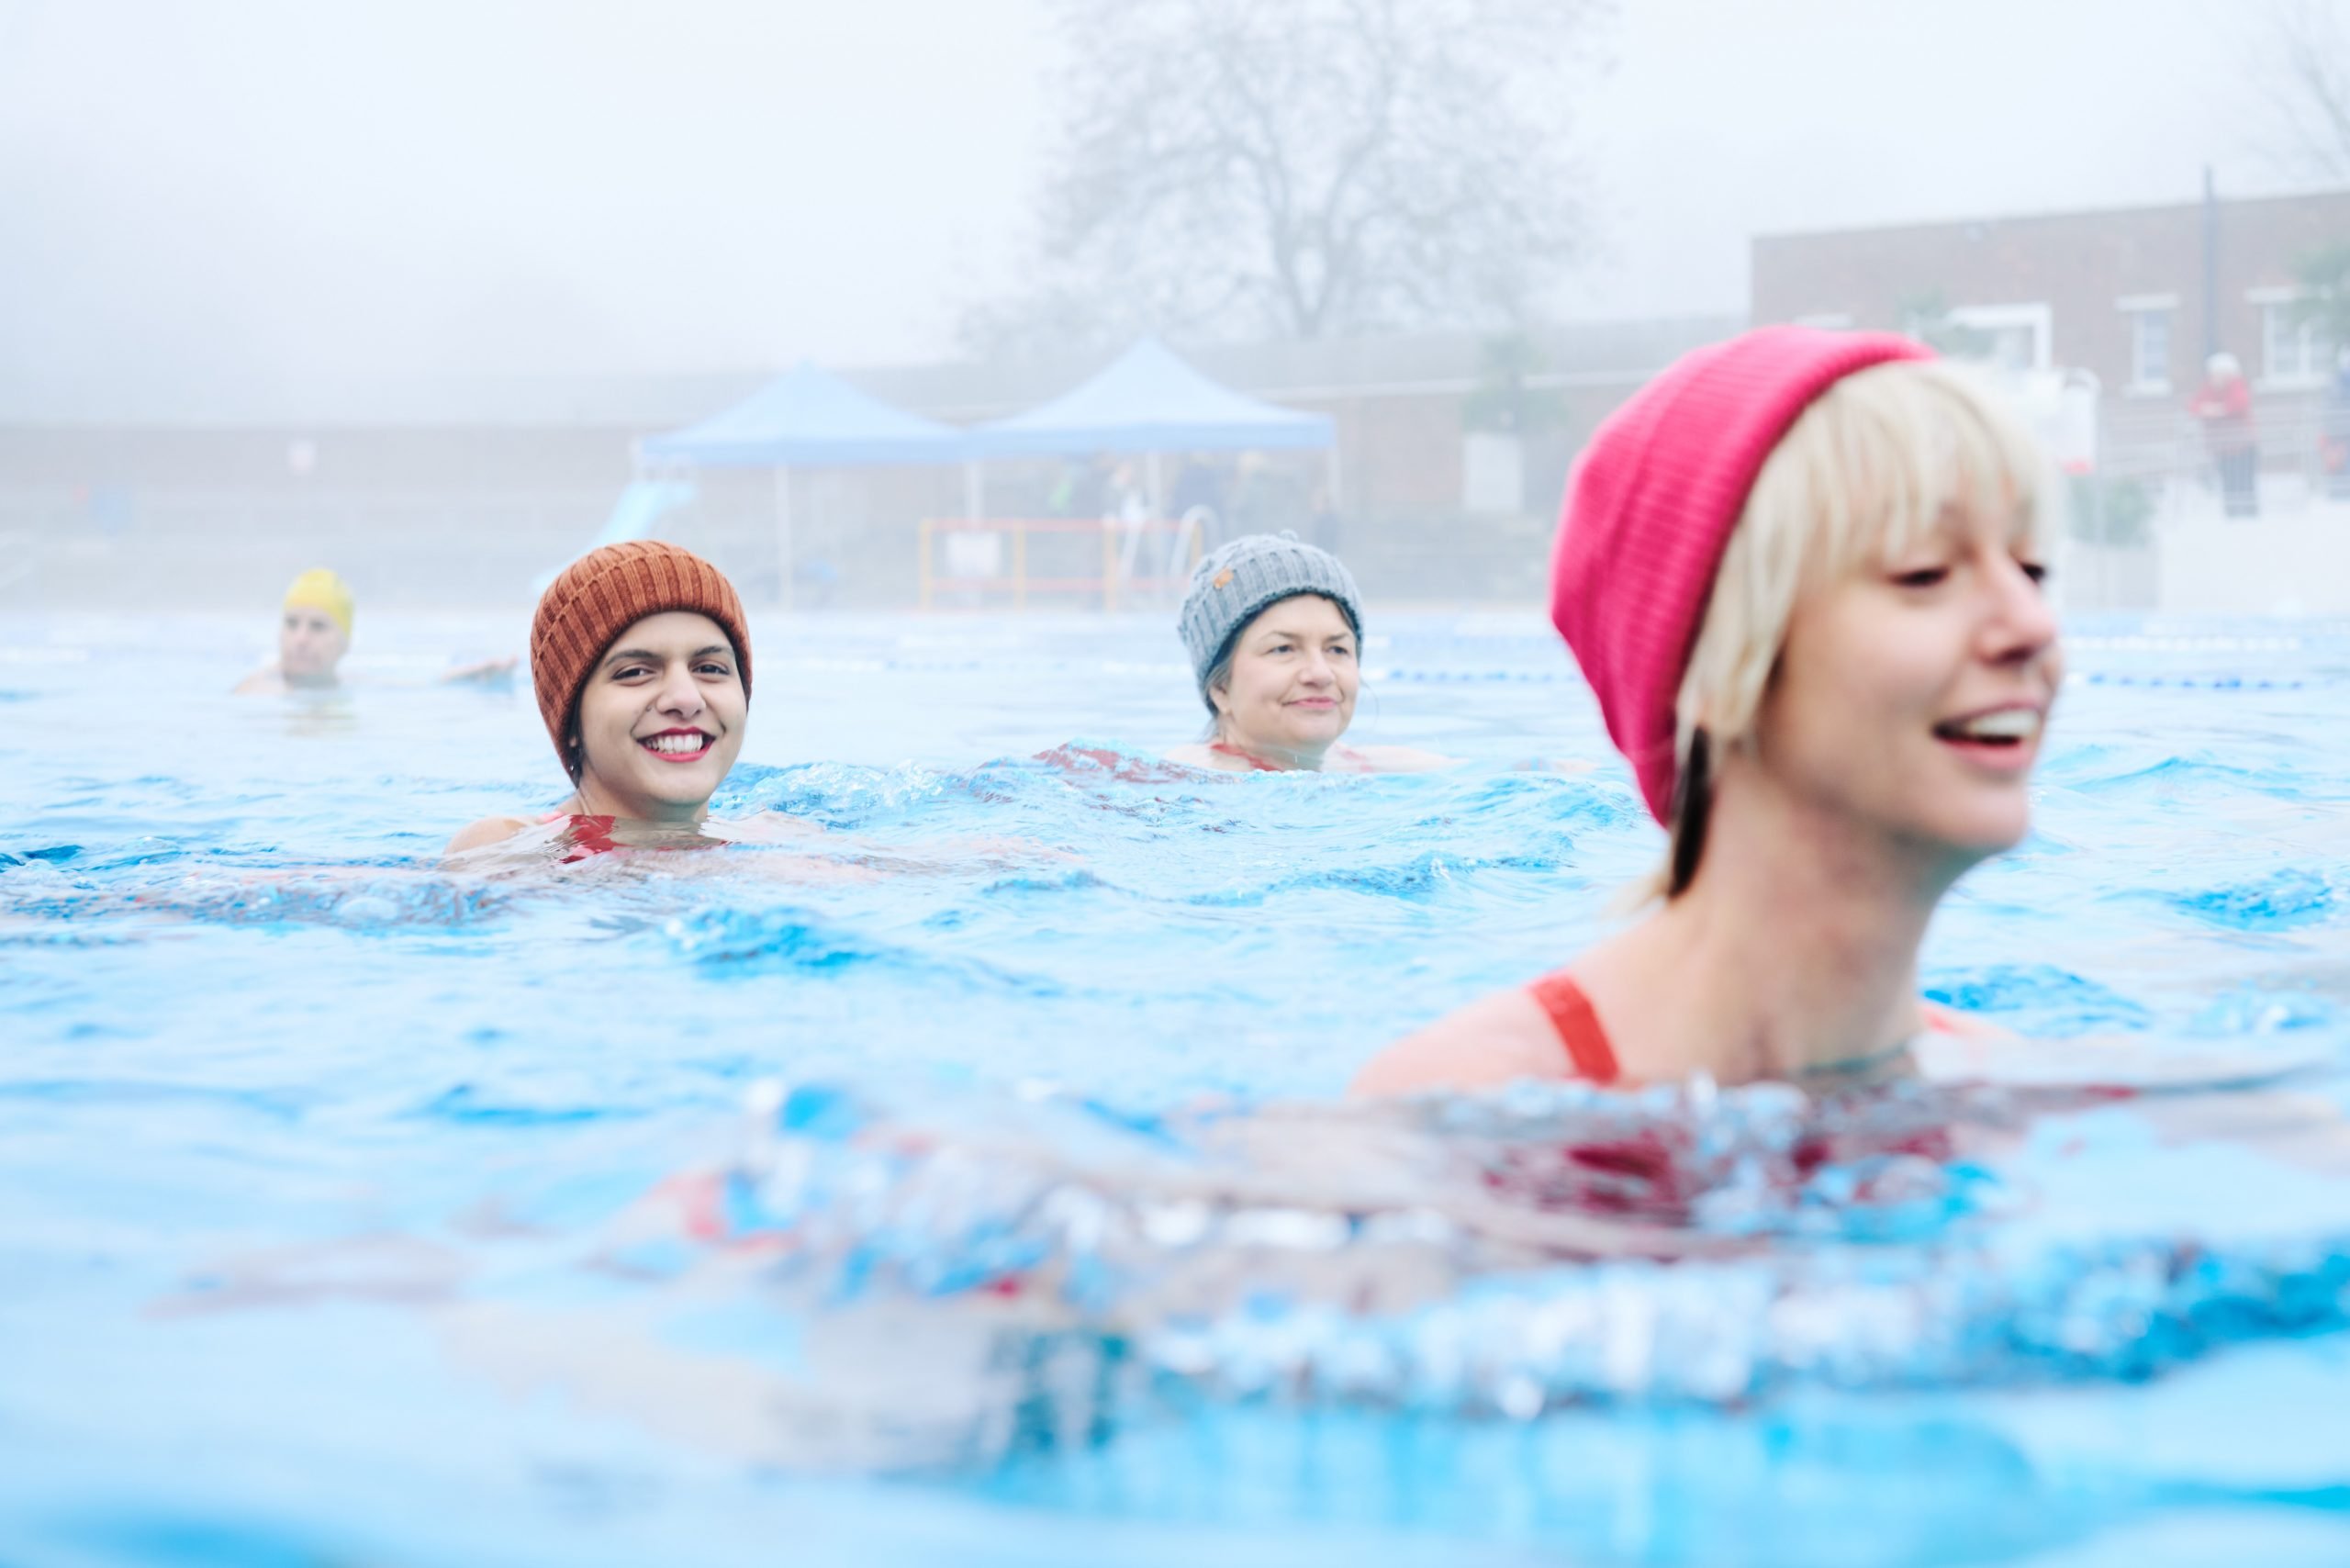 Swimmers take a dip in the cold water